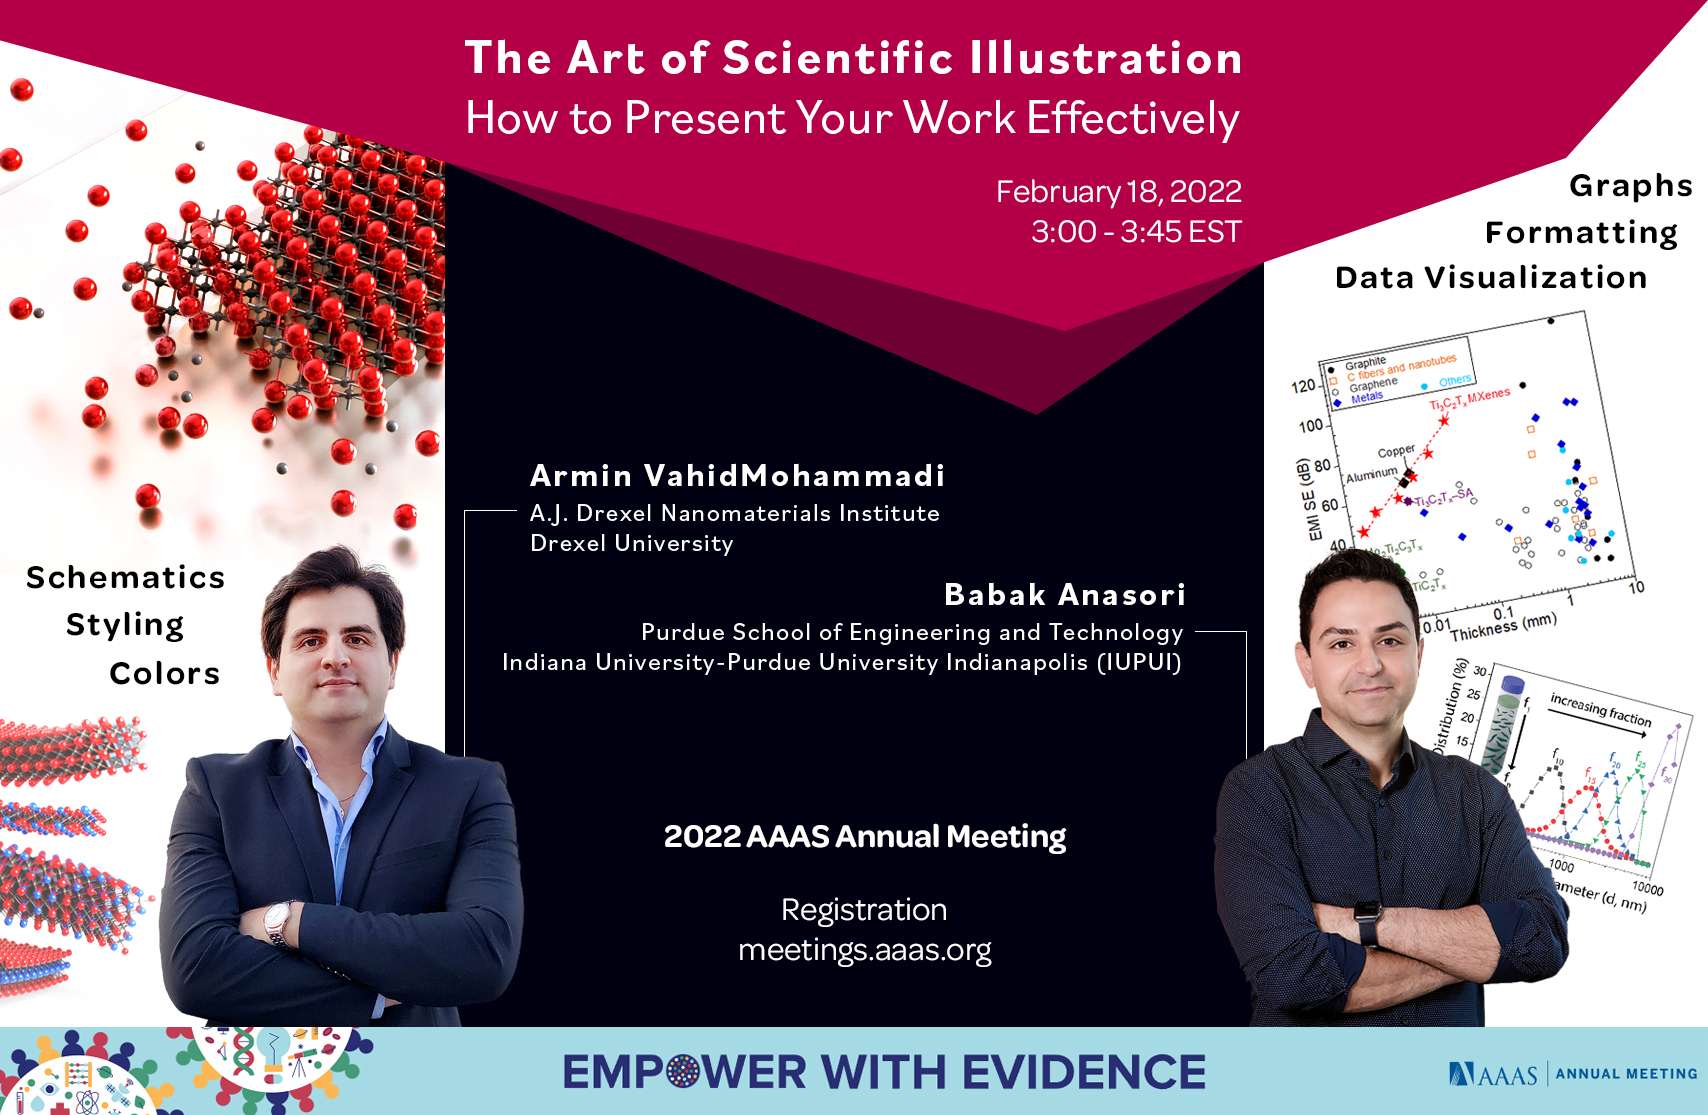 The Art of Scientific Illustration Workshop comes to the AAAS 2022 Annual Meeting